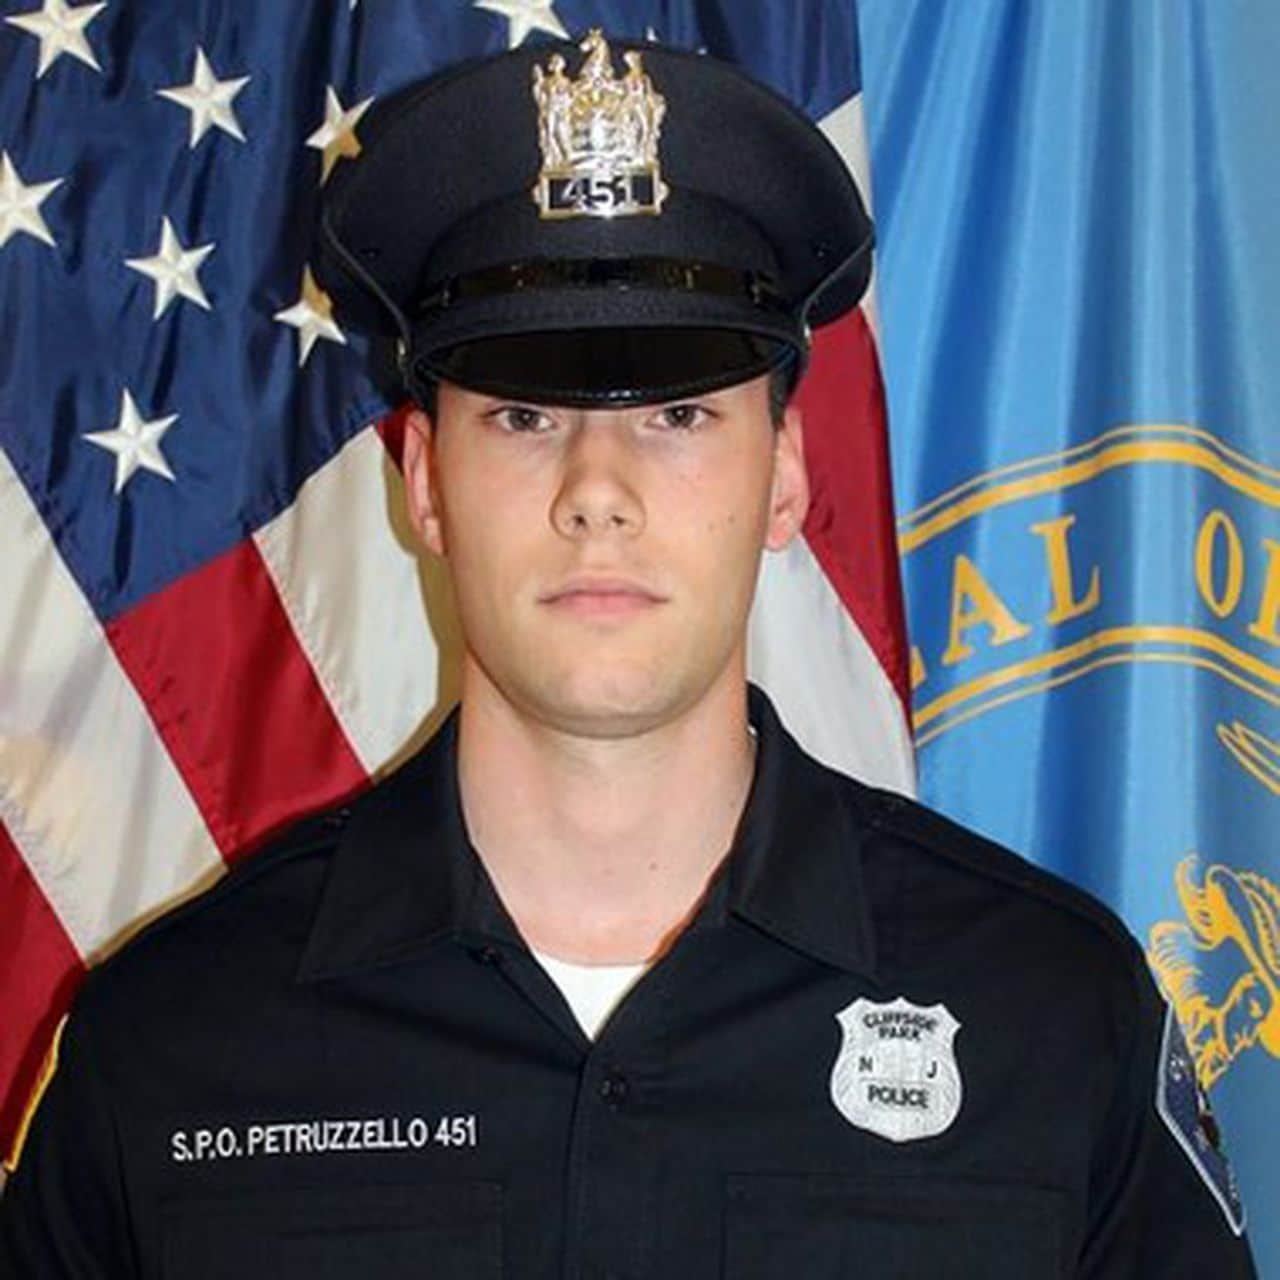 Cliffside Park officer death: What is a special police officer?